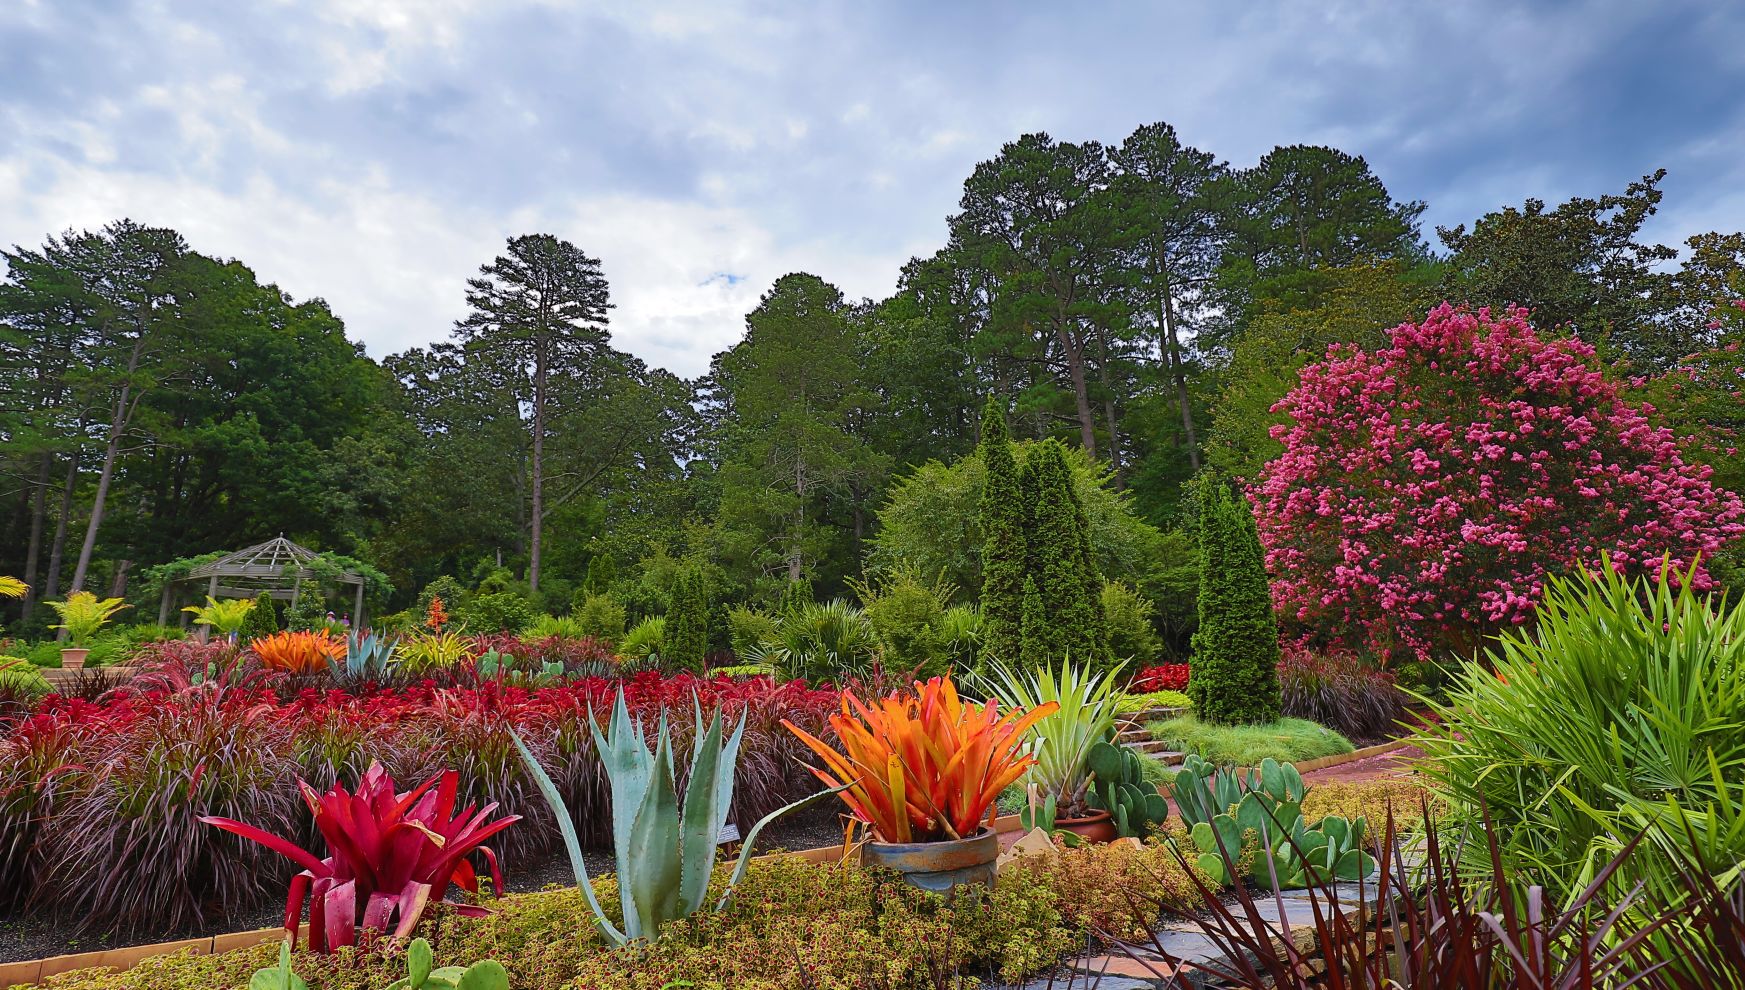 A Garden With Colorful Flowers